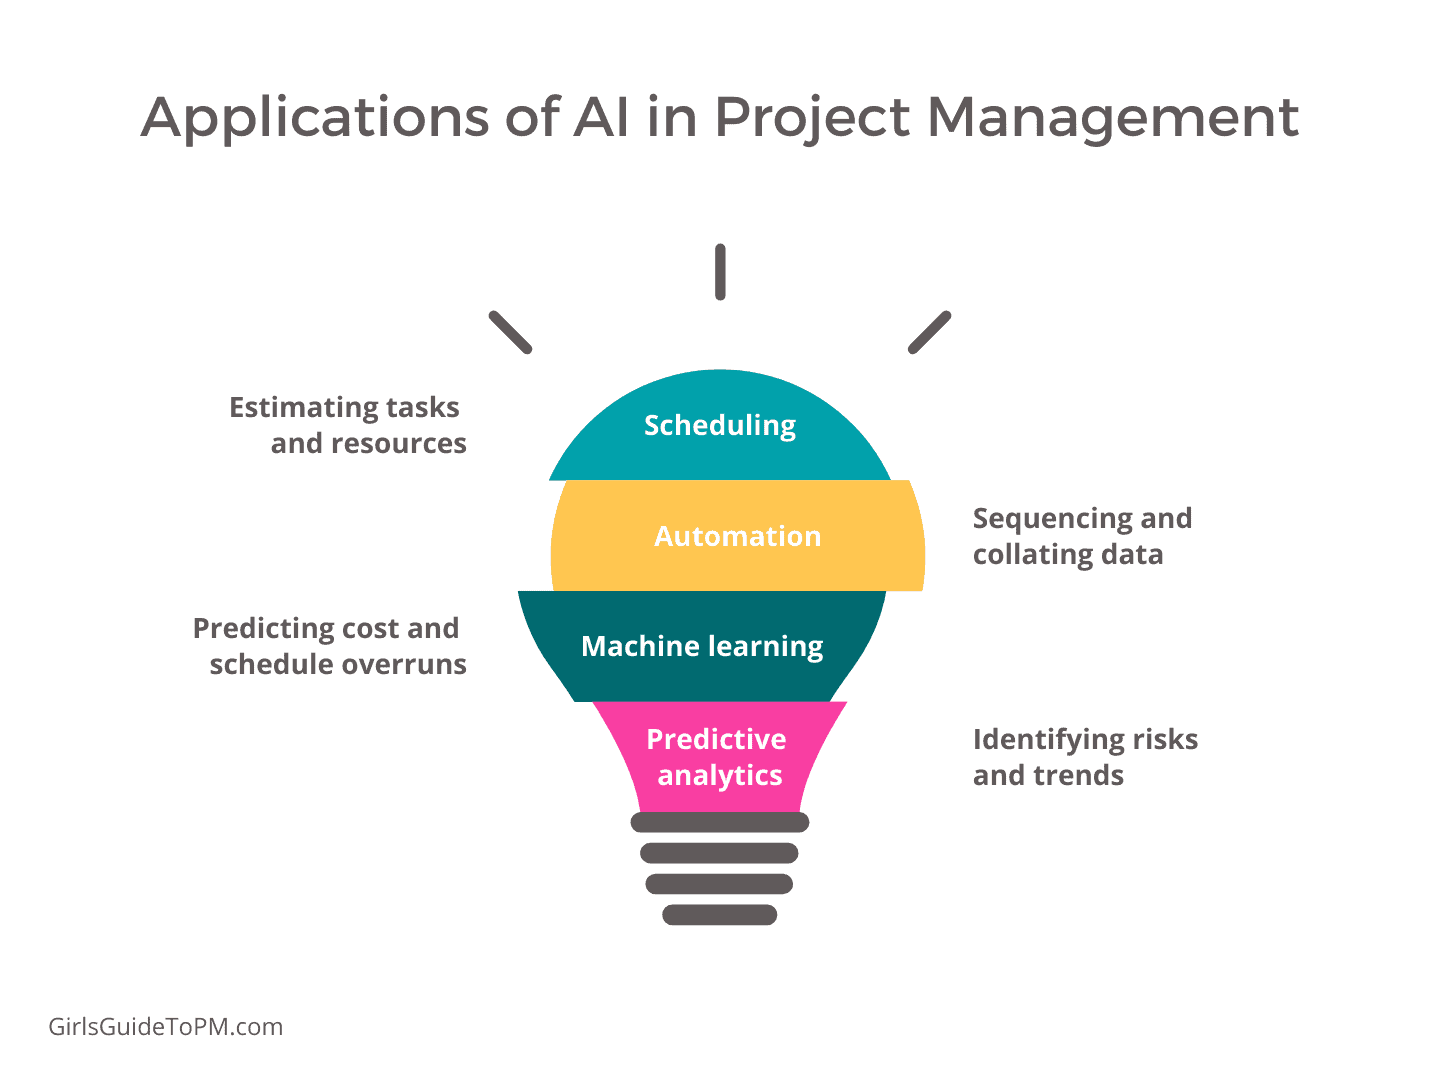 List of applications of AI in project management